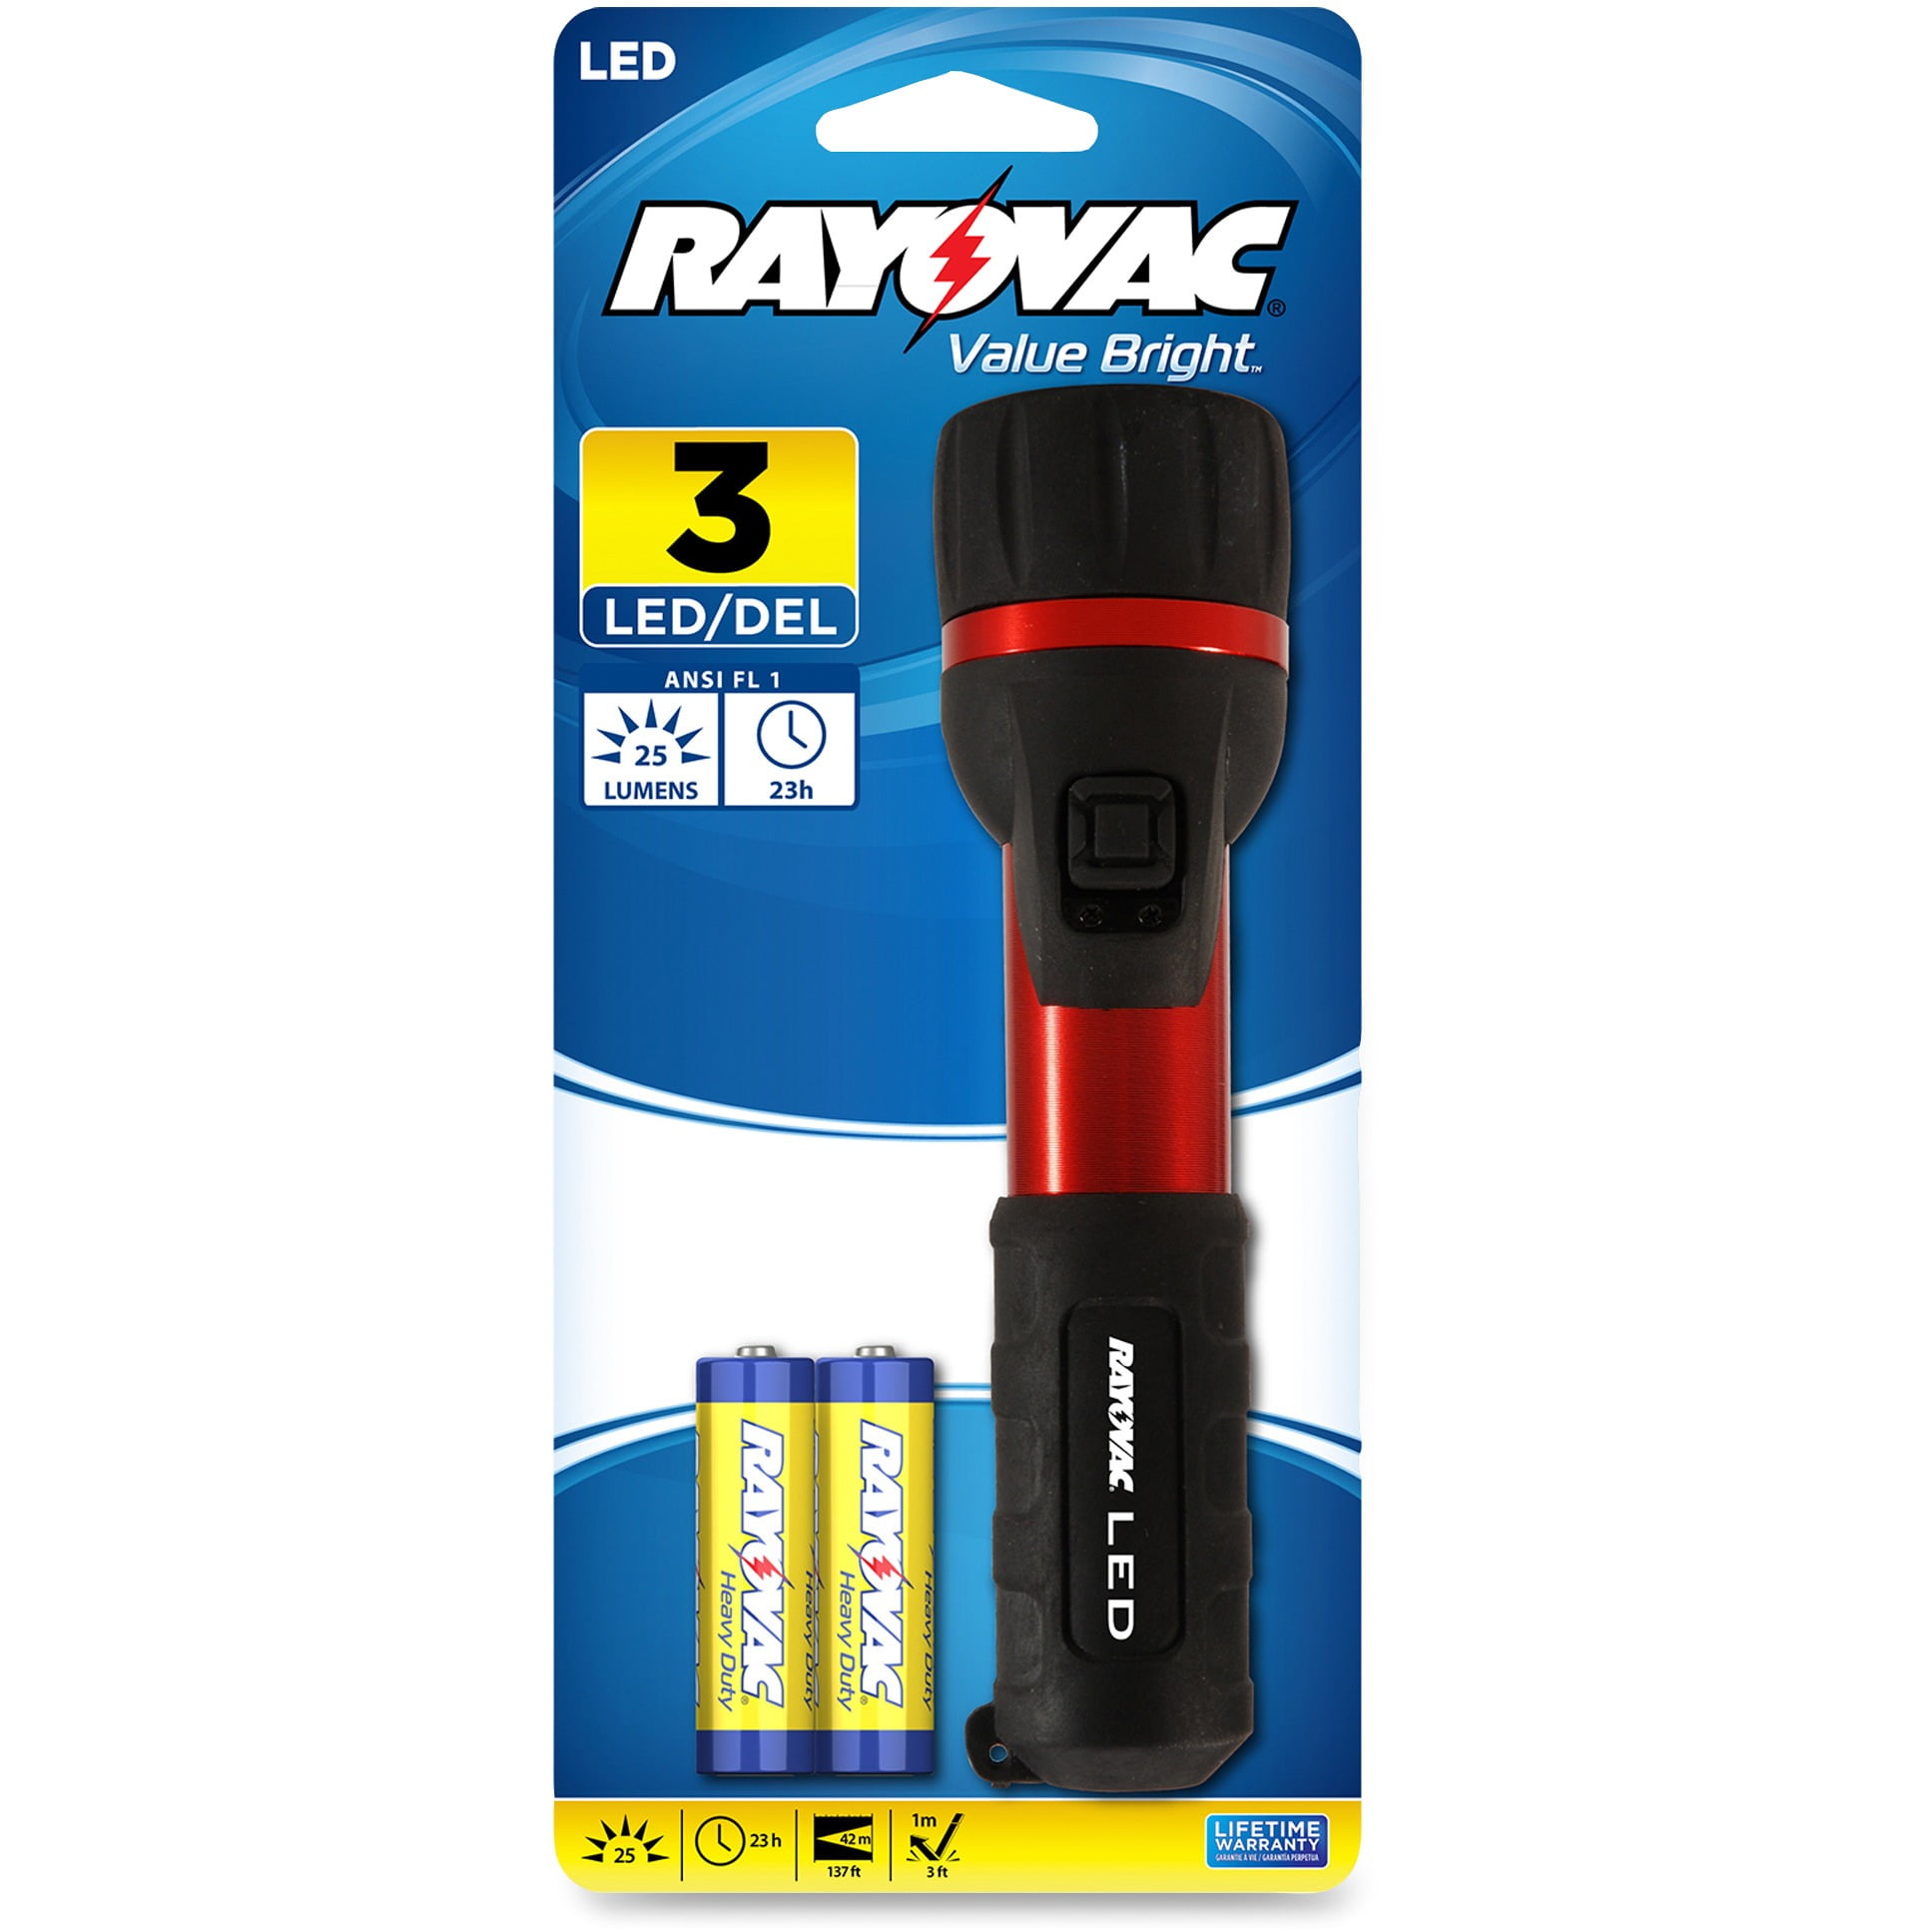 IP67 Waterproof RAYOVAC Tactical LED Flashlight Super Bright and Durable Metal 